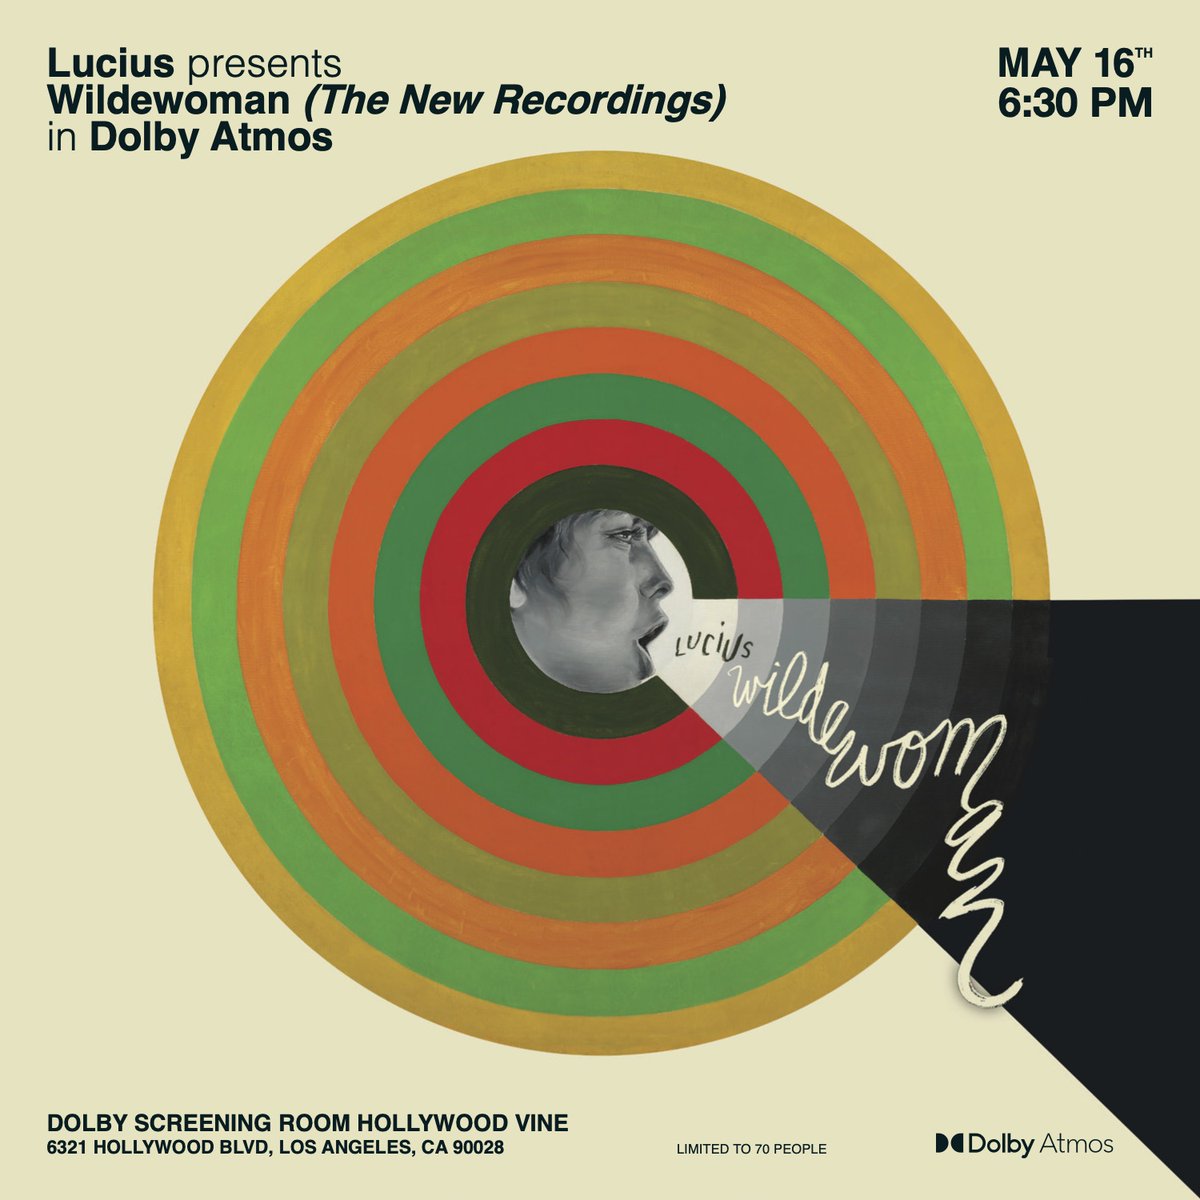 Last chance to win tickets for an early listen of Wildewoman (The New Recordings) in @Dolby ATMOS! LA: laylo.com/lucius/LAListe… BOS: laylo.com/lucius/BOSList…